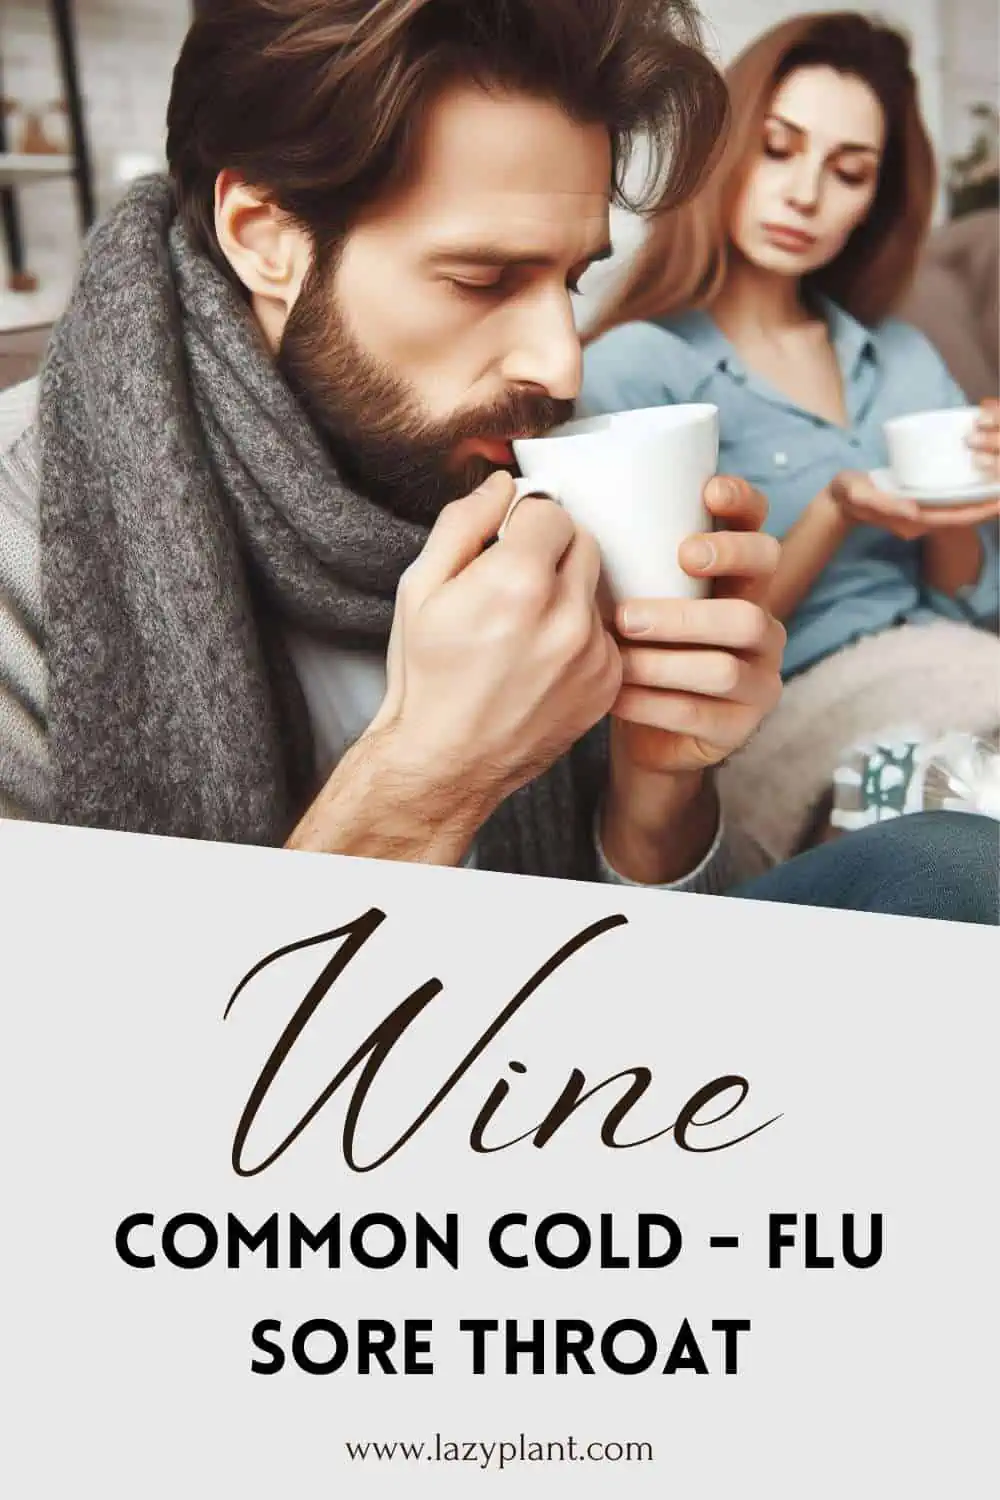 Benefits of Wine for the flu, common cold & sore throat.